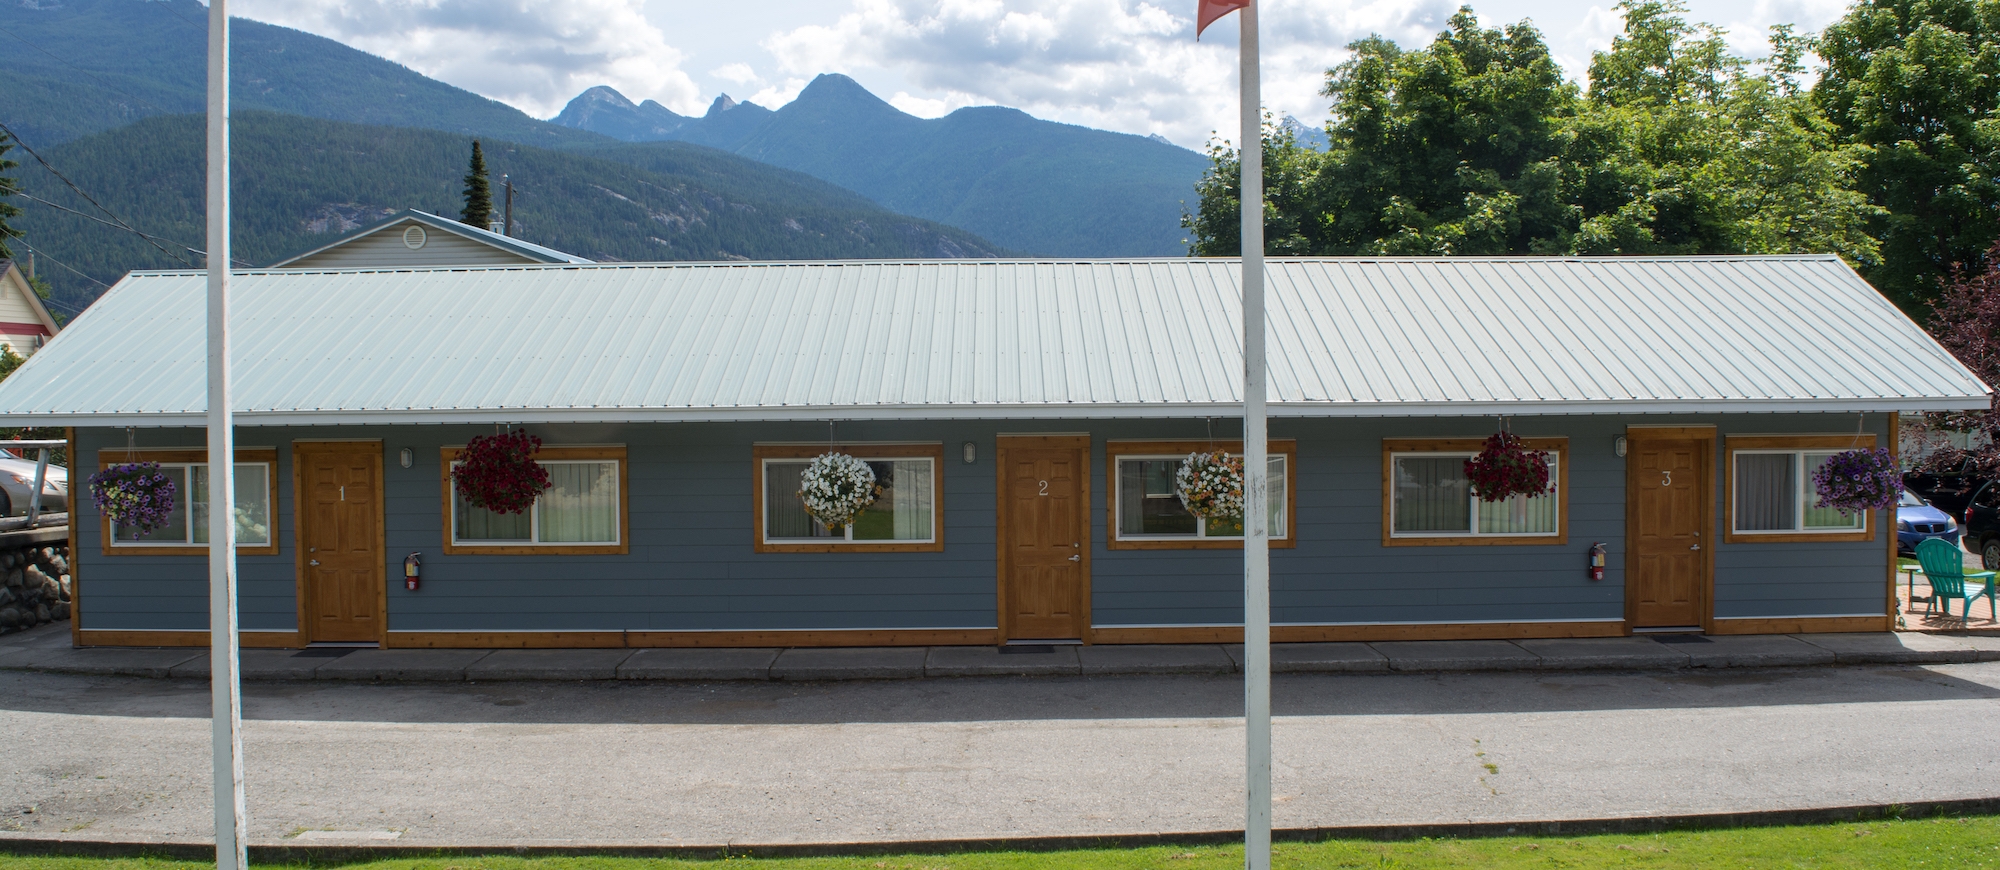 the front view of the kaslo motel